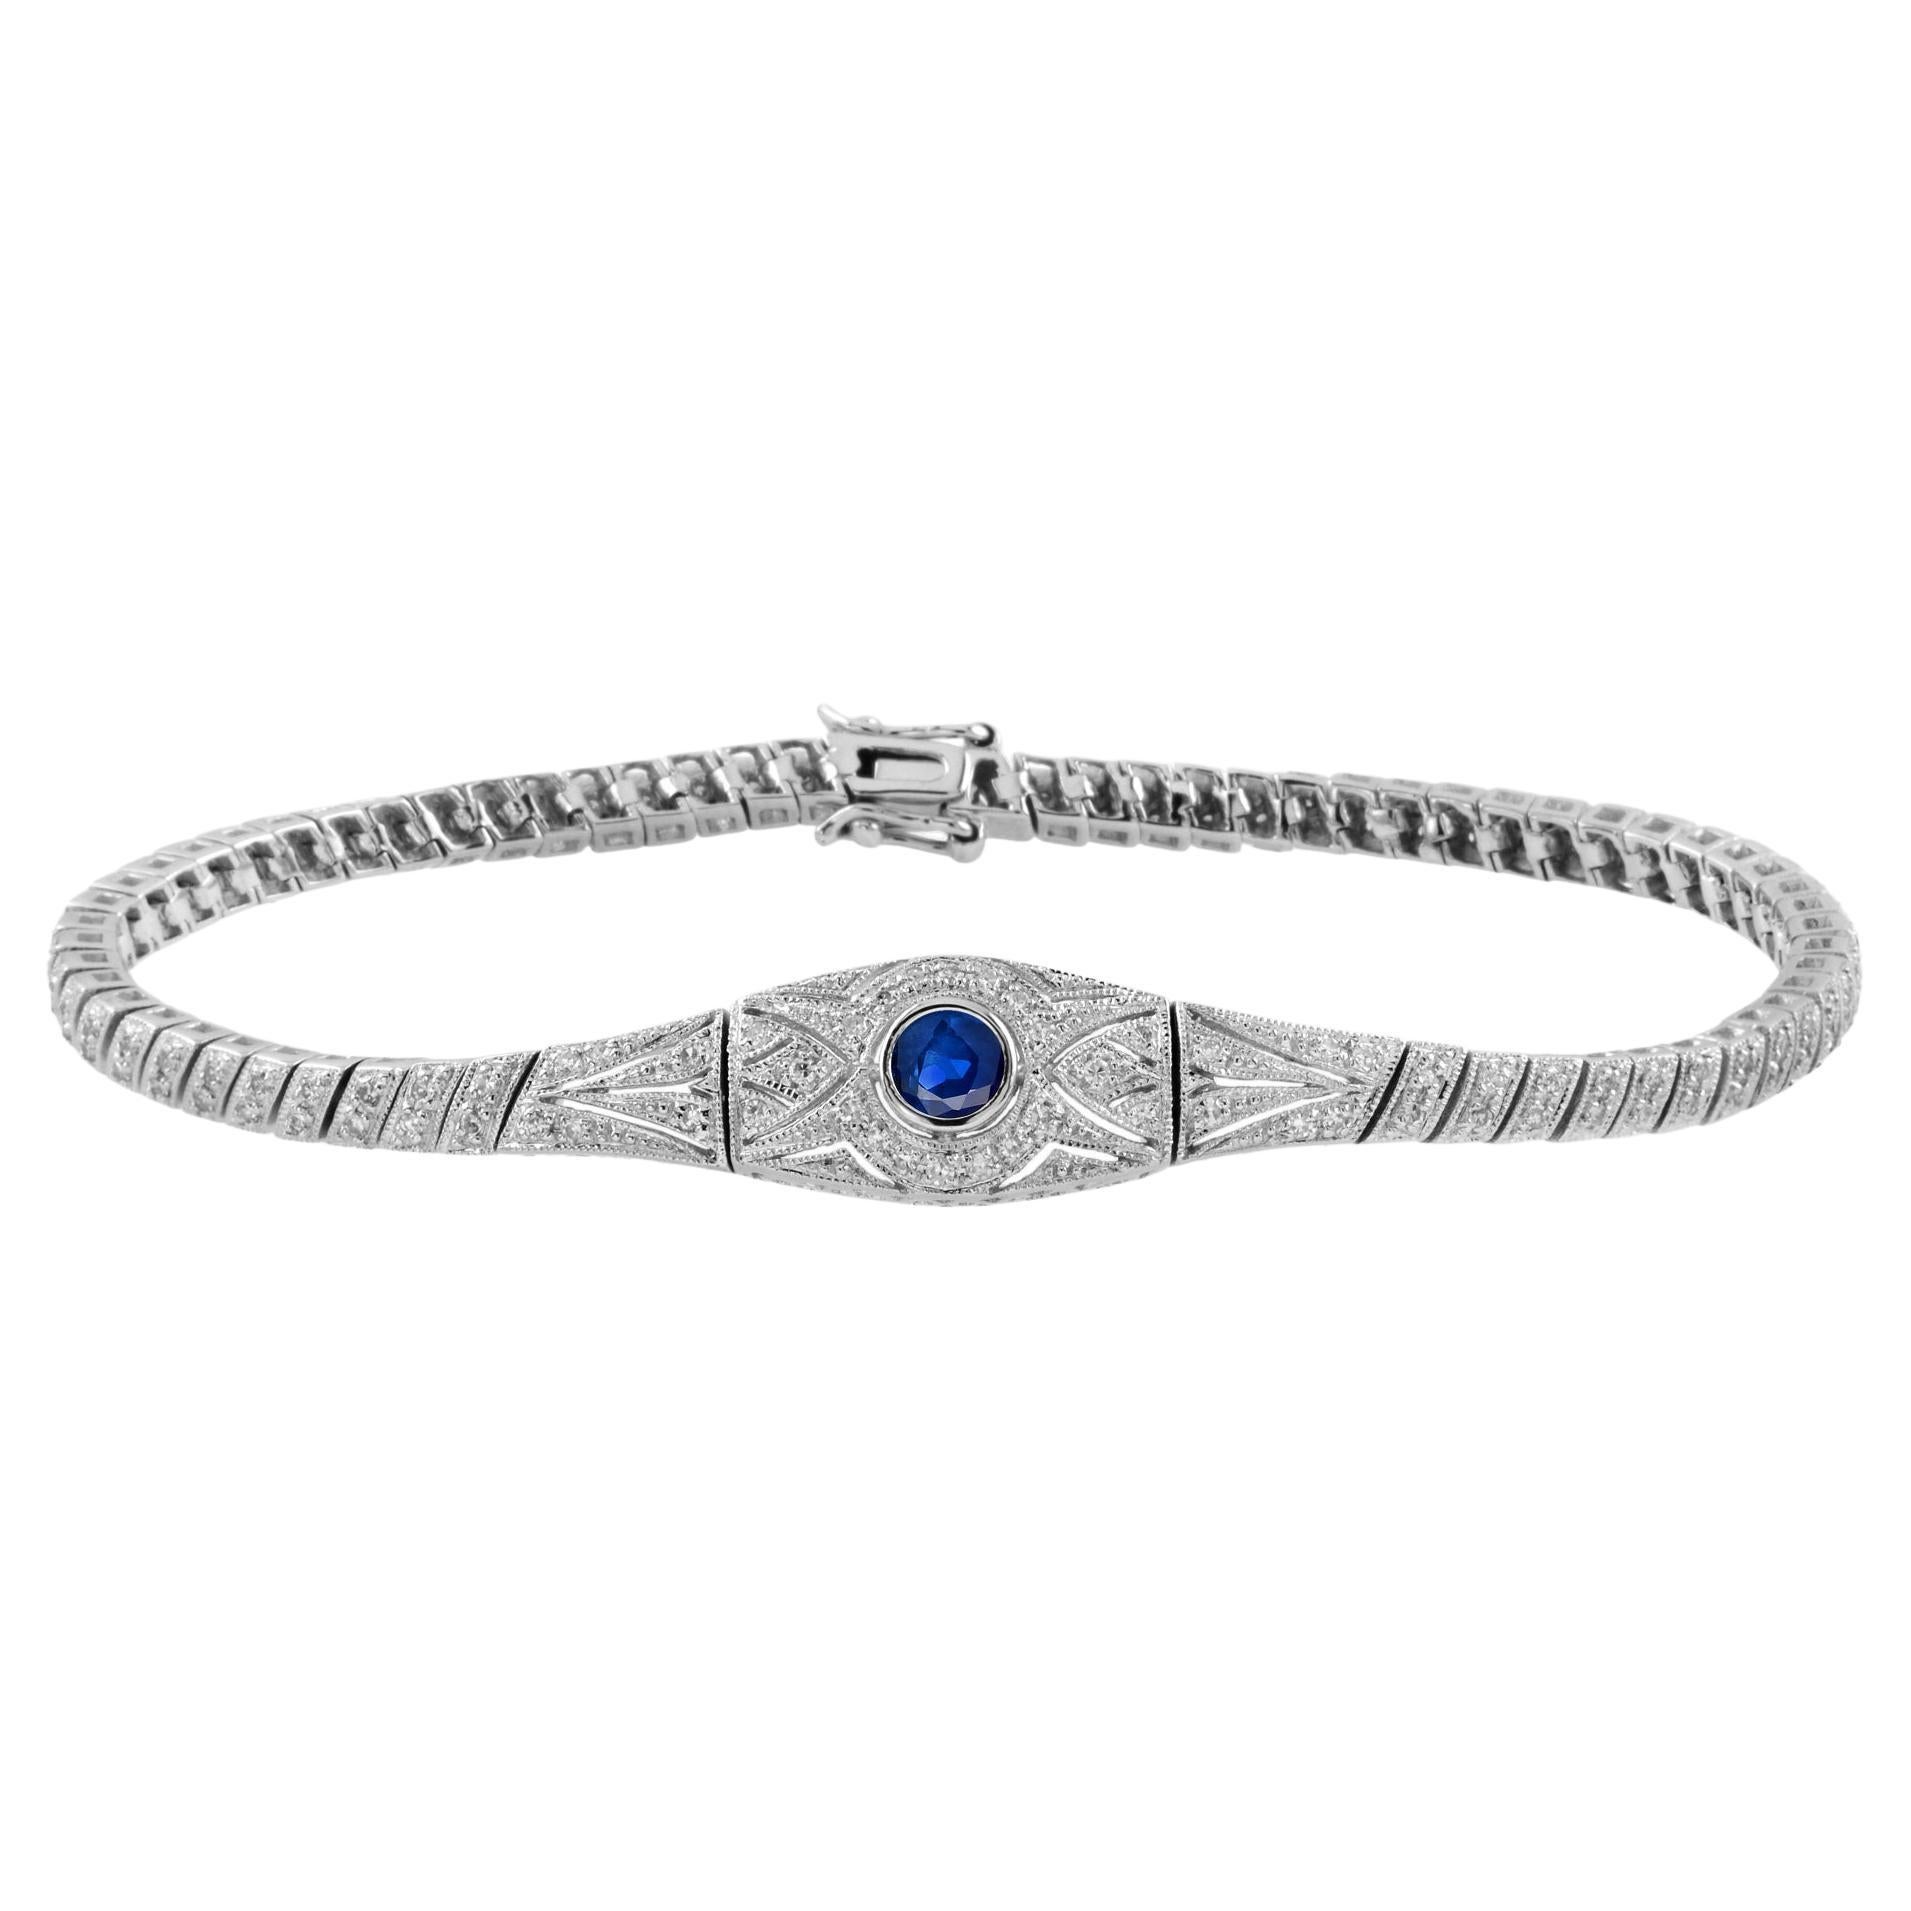 Single Sapphire and Diamond Accent Art Deco Style Bracelet in 14K White Gold